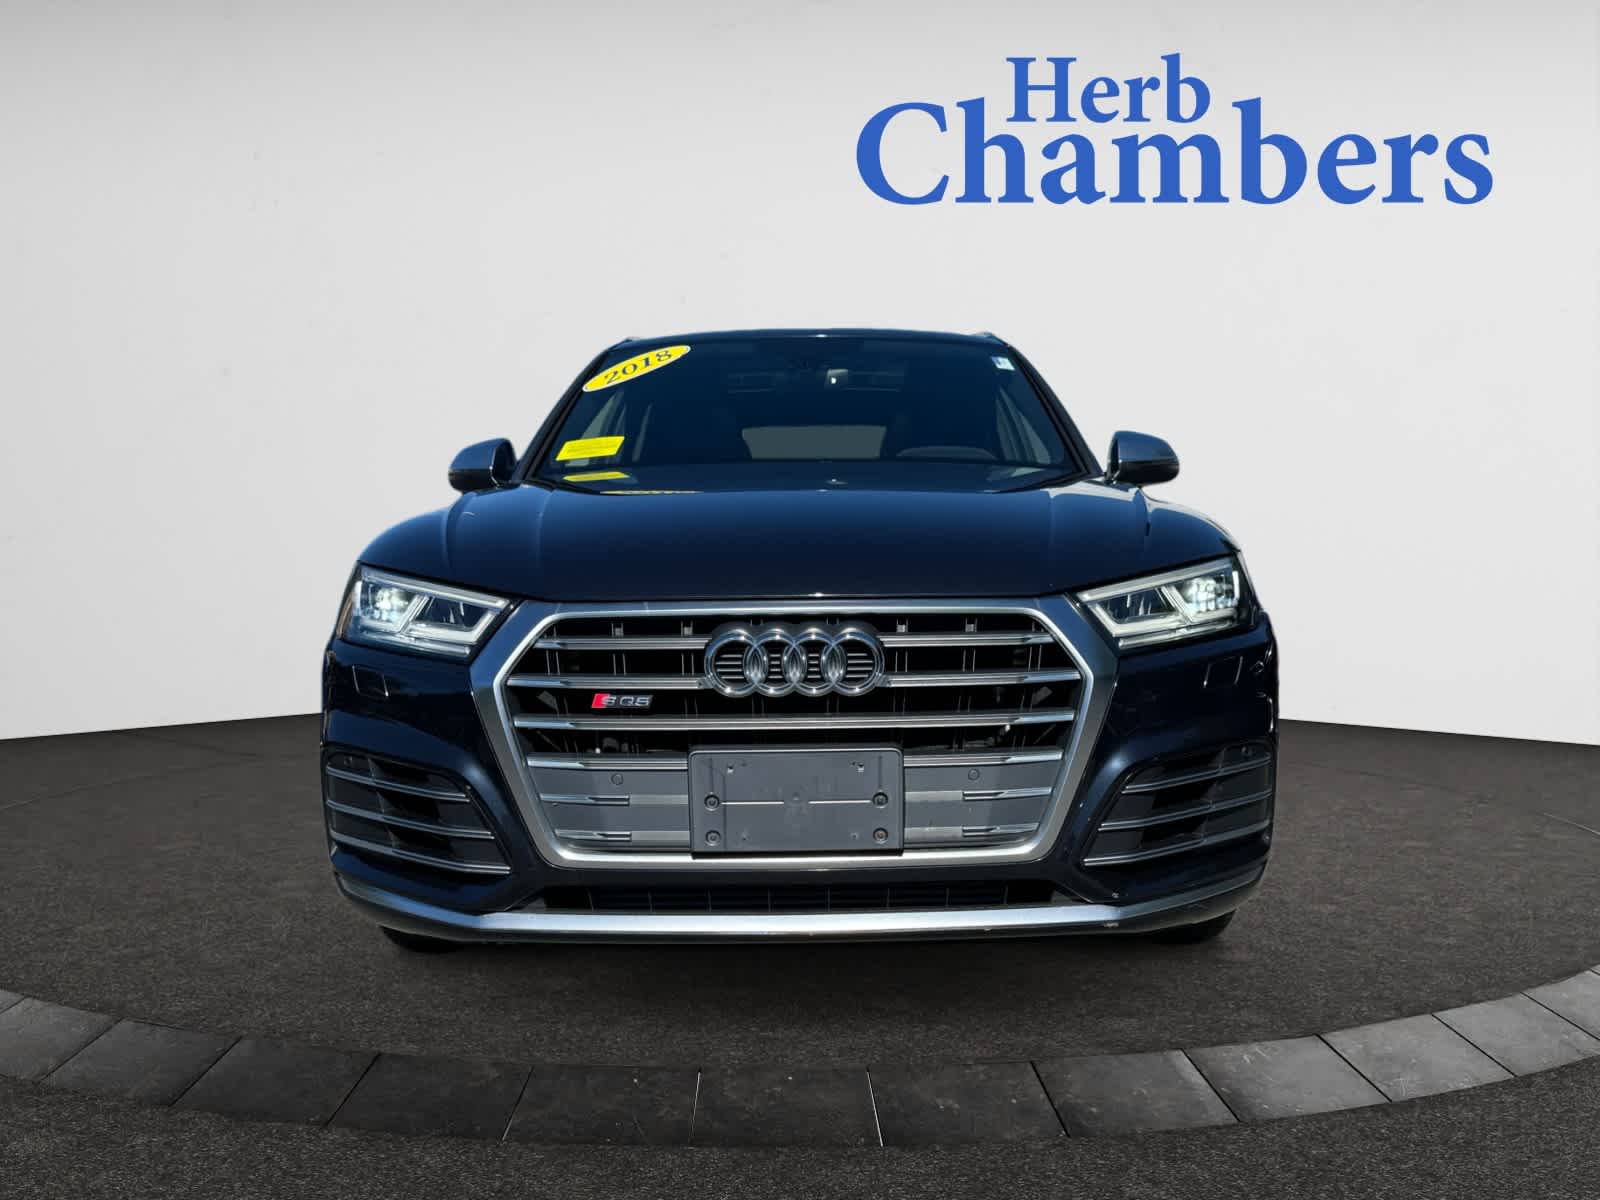 Used 2018 Audi SQ5 Premium Plus with VIN WA1A4AFY4J2212749 for sale in Brookline, MA